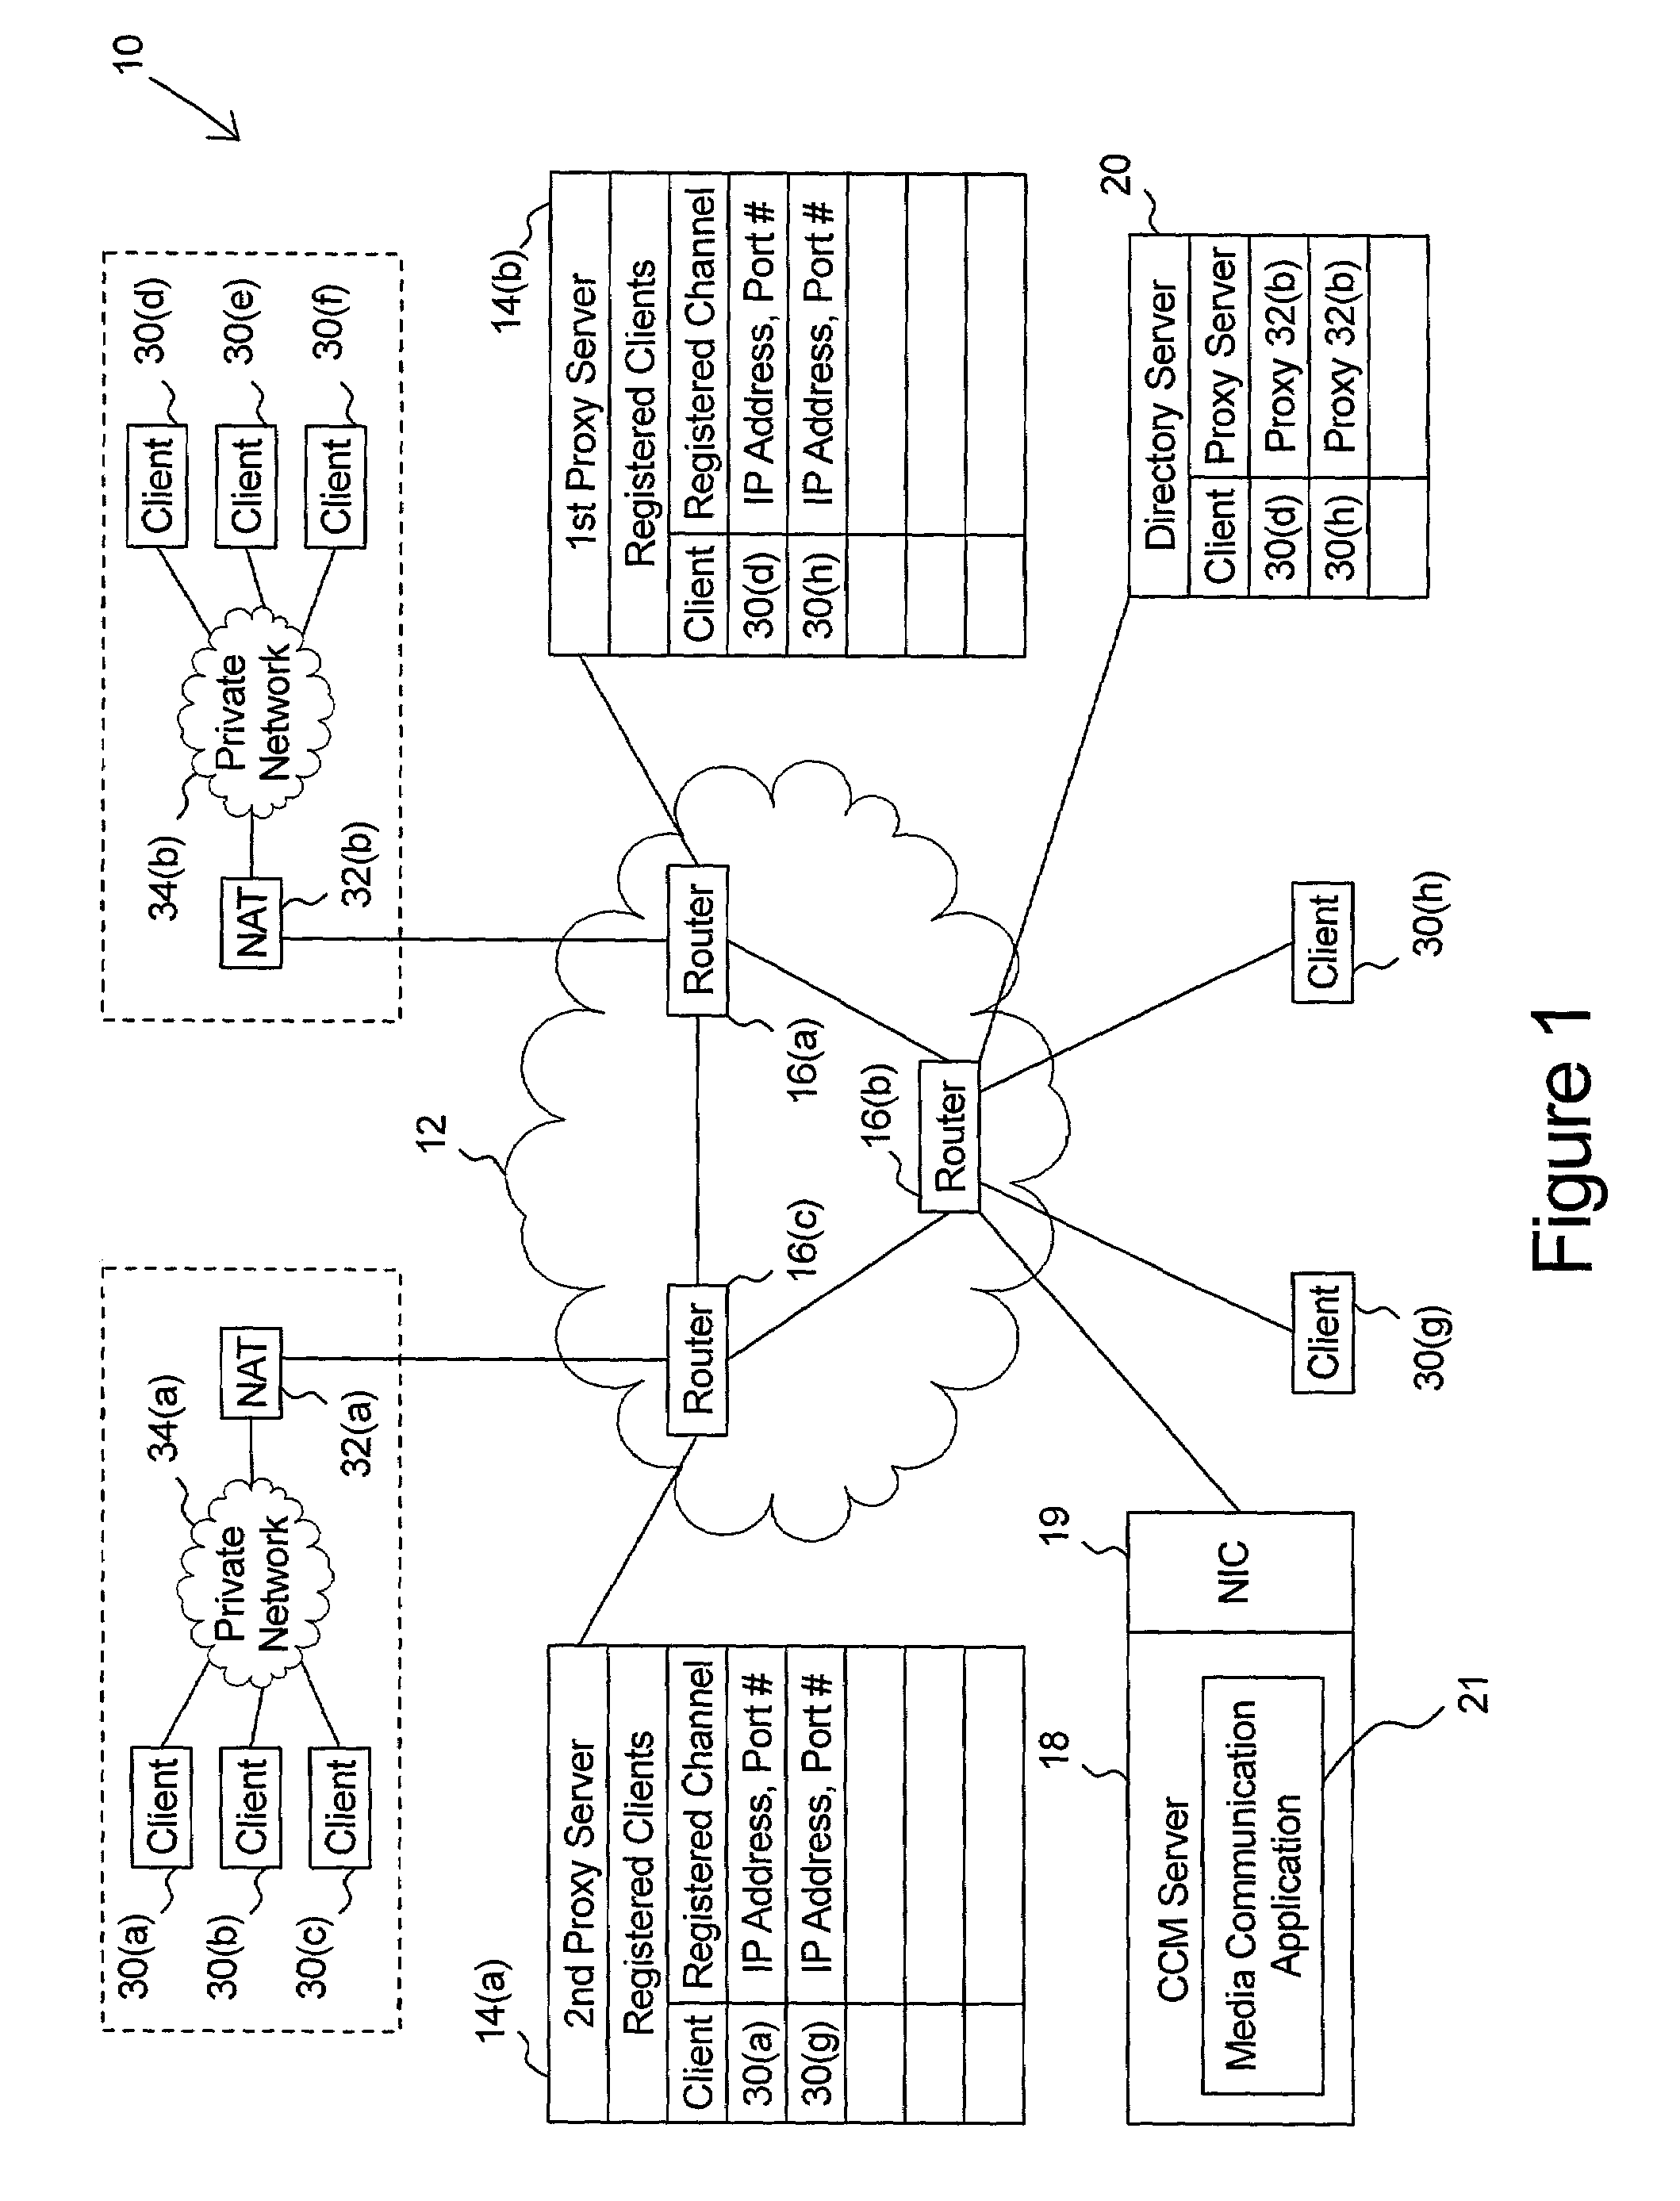 System and method for providing real time connectionless communication of media data through a firewall